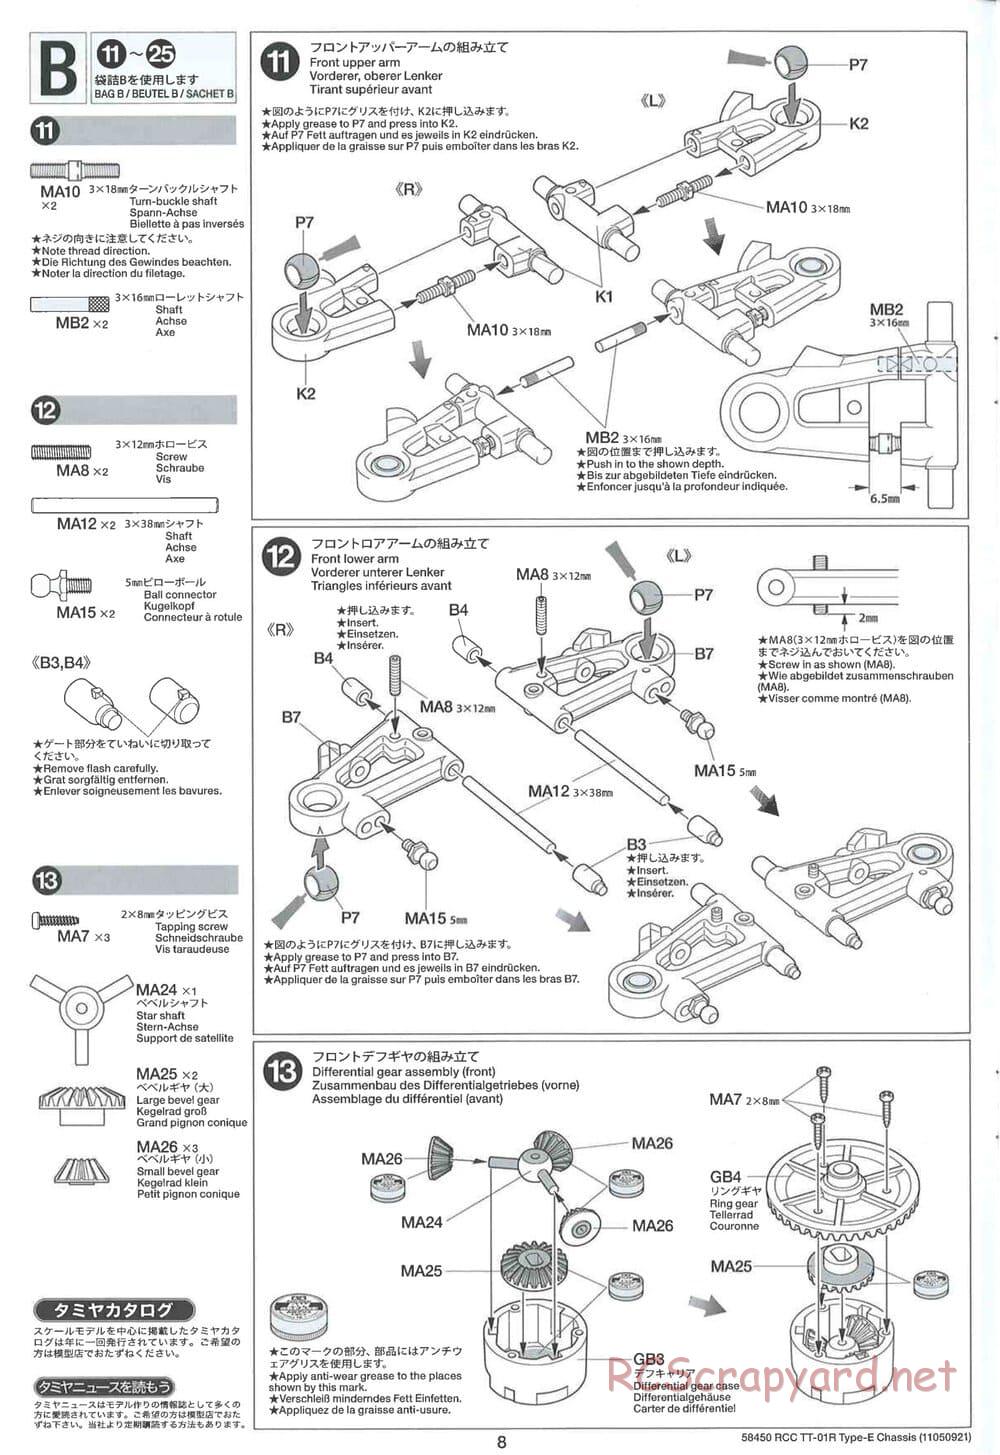 Tamiya - TT-01R Type-E Chassis - Manual - Page 8